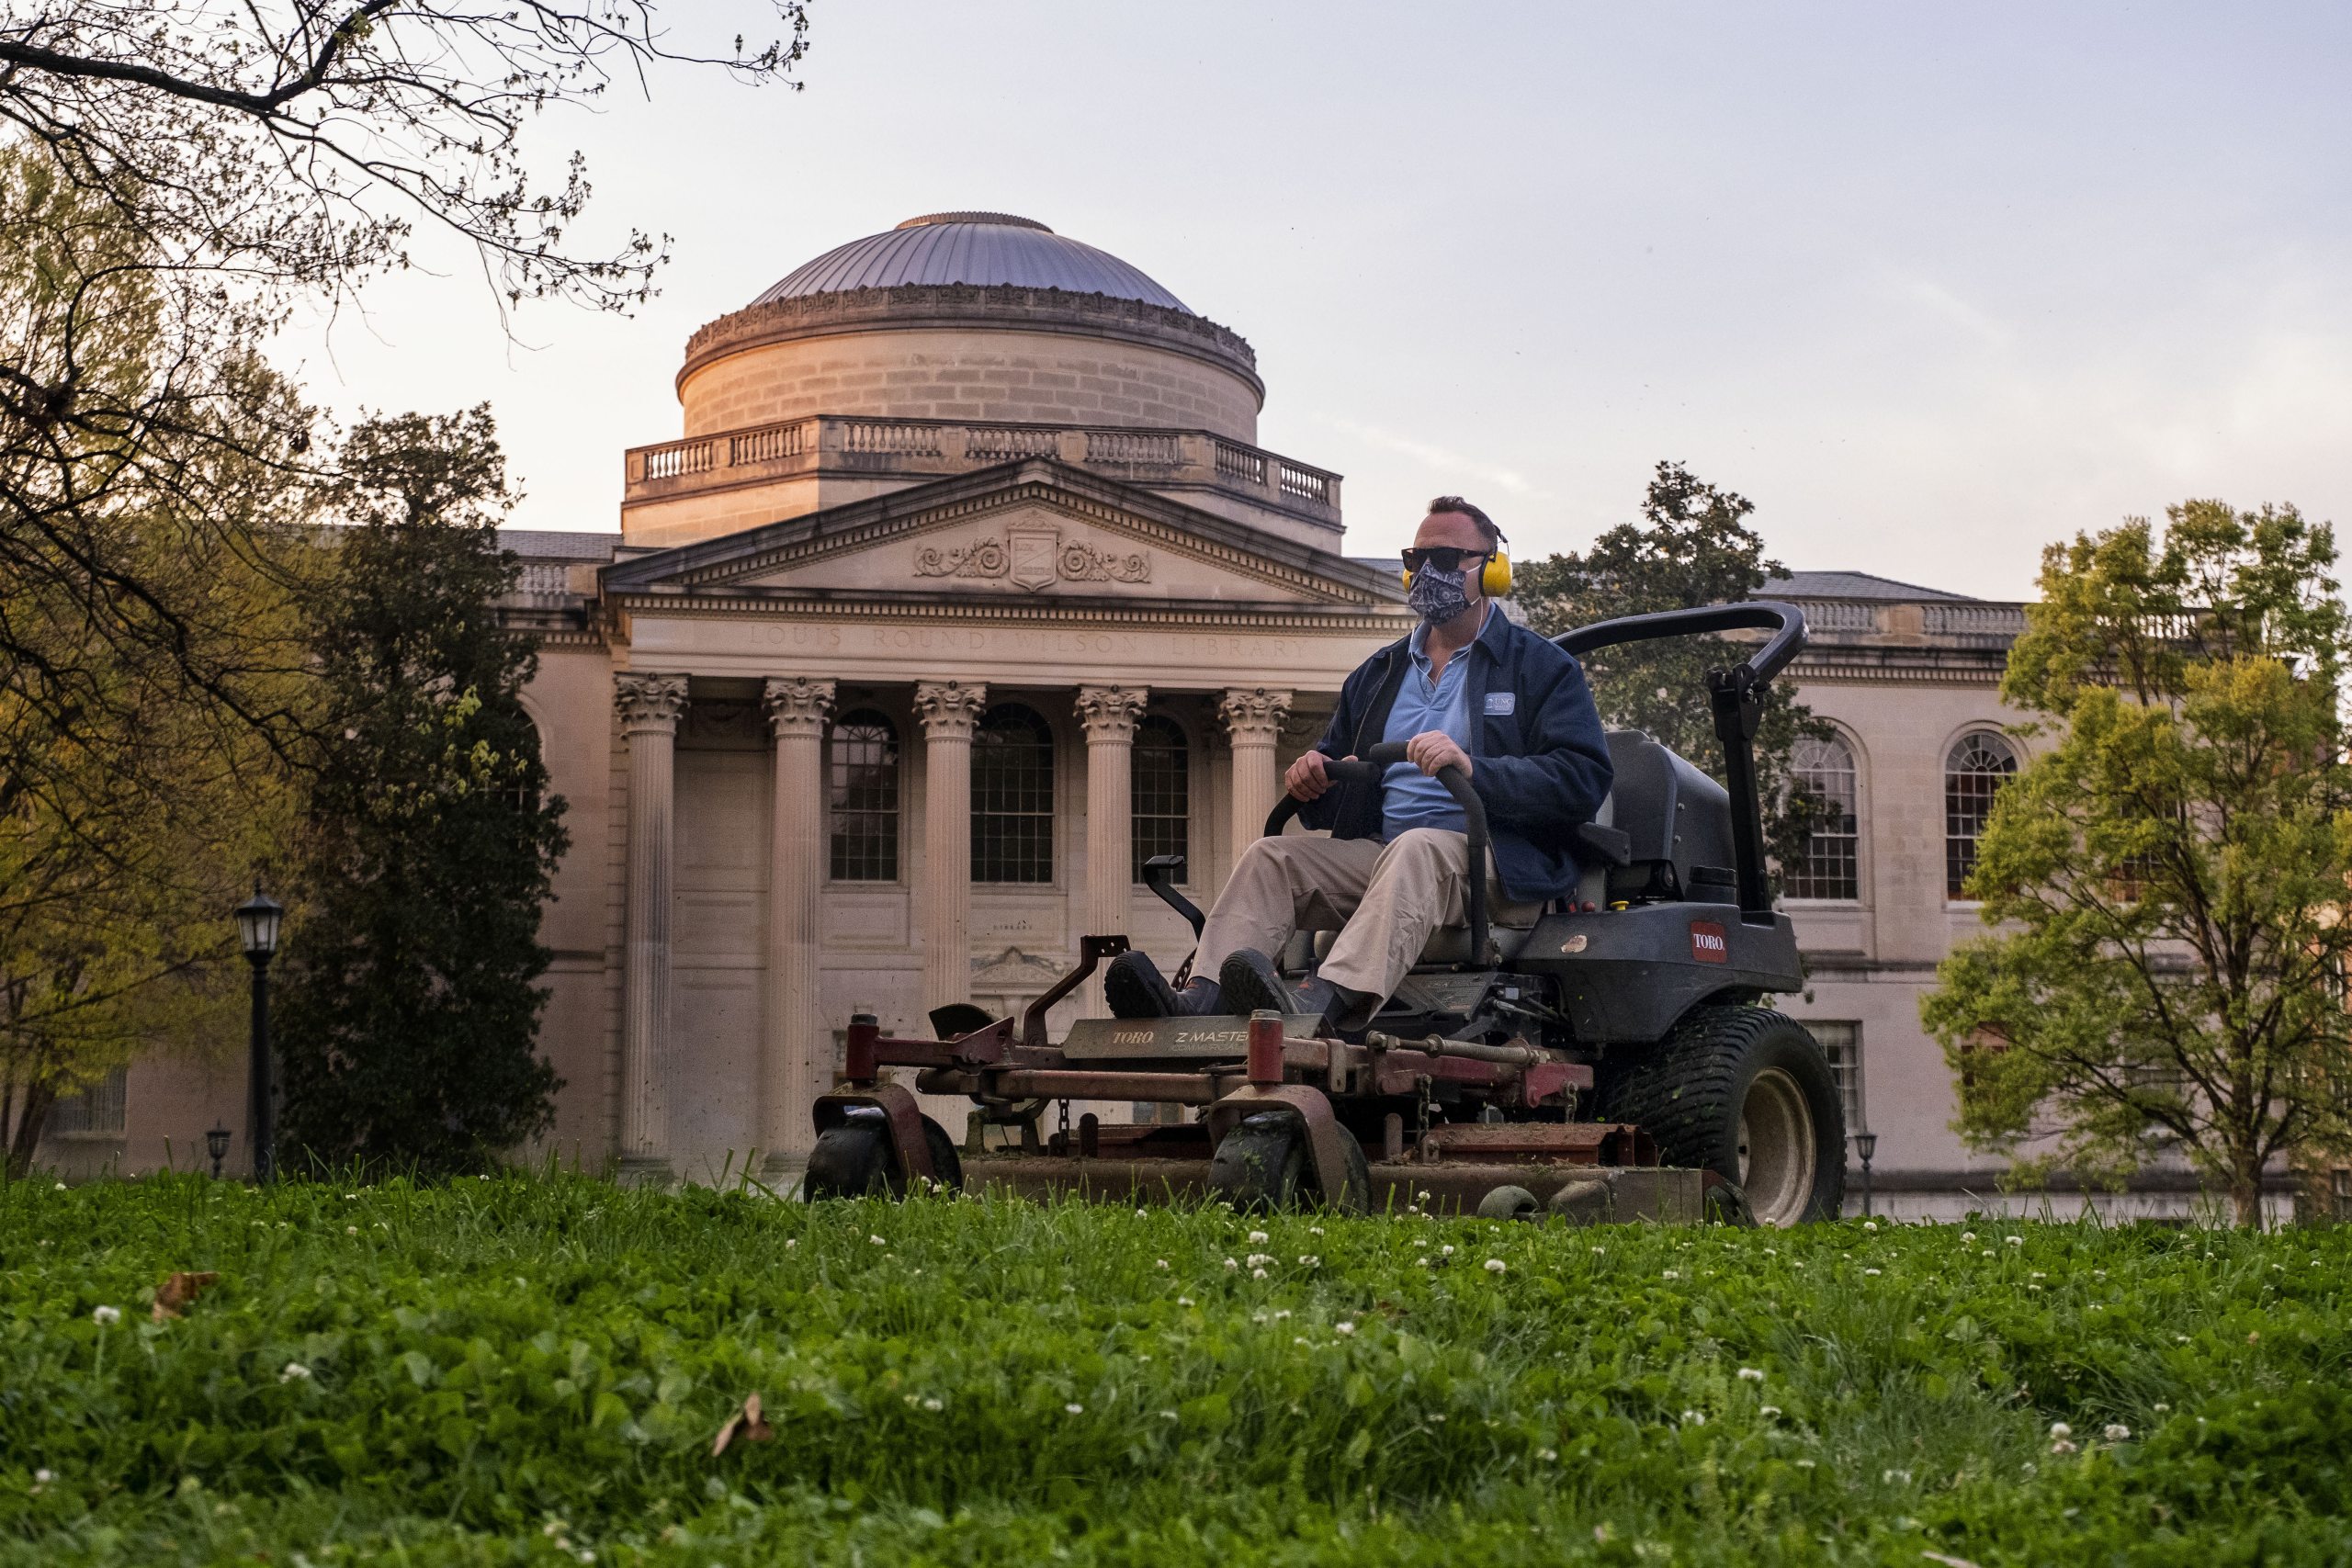 Eric Tolar cuts grass on Polk Place in front of Wilson Library. When few people were on campus from March into summer, Tolar and his crewmates took care of 81 acres of the University’s most visible outdoor areas. “The number one thing we’ve been about is being safe,” Tolar said. “I’ve felt fortunate to be at work at times when the news is 24-7 and can bring you down. We were outside and able to take our minds off of it. And, we could see that people were here at times.”